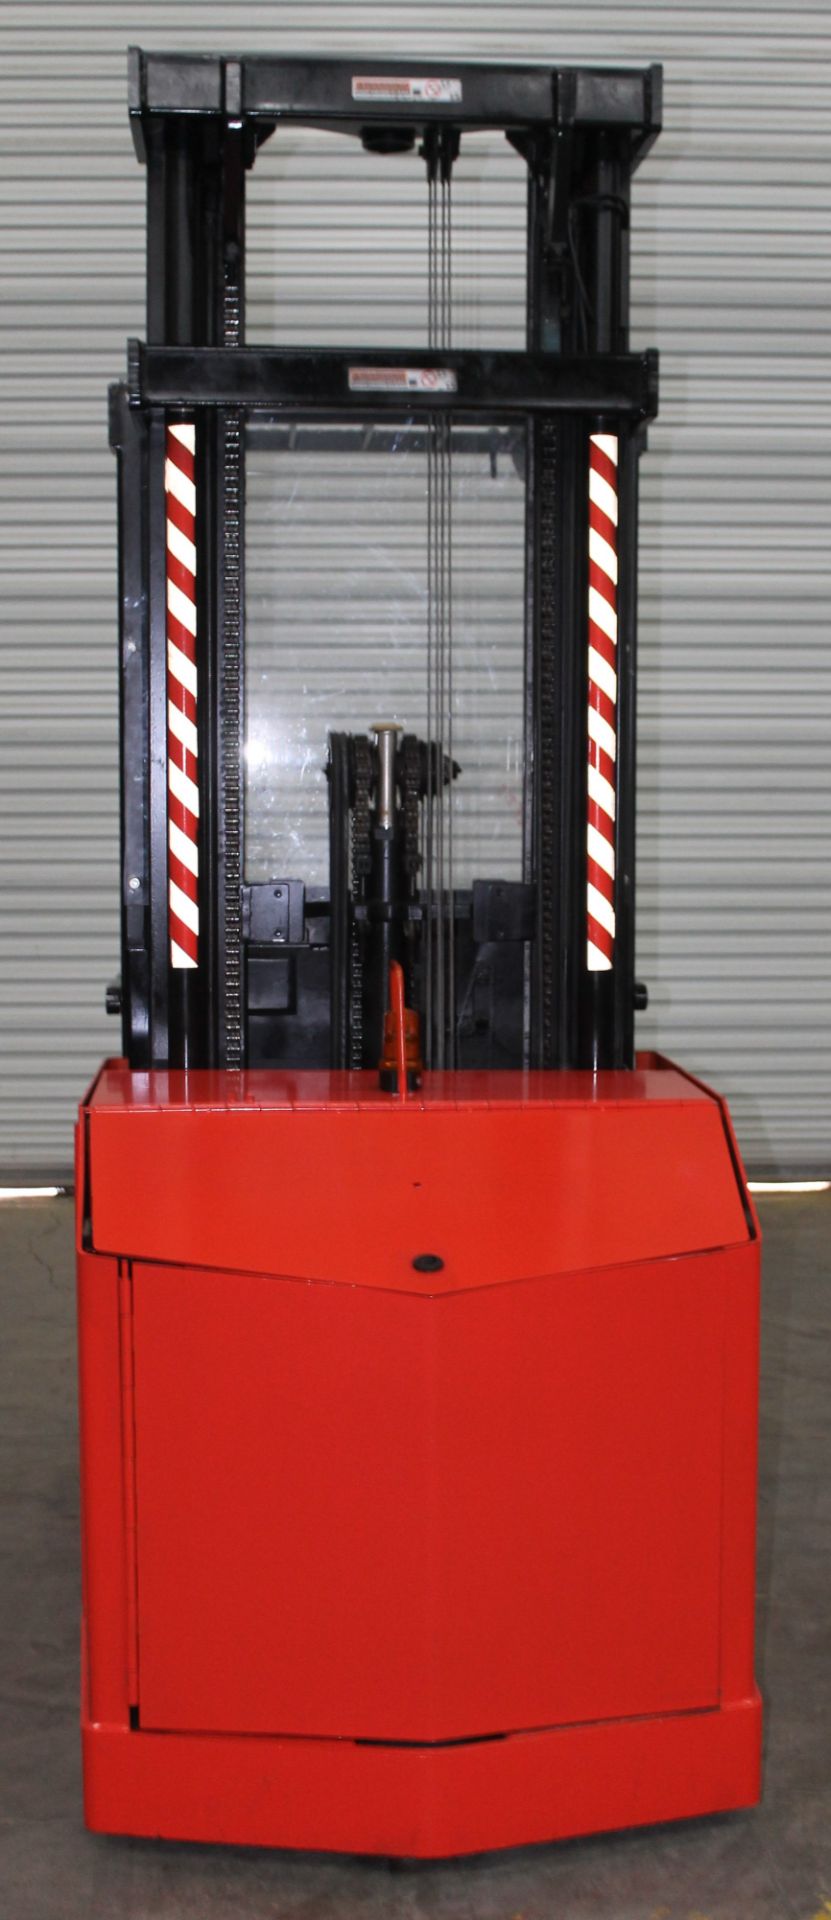 PRIME MOVER 3000 LBS. CAPACITY ORDER PICKER, (WATCH VIDEO) - Image 4 of 5